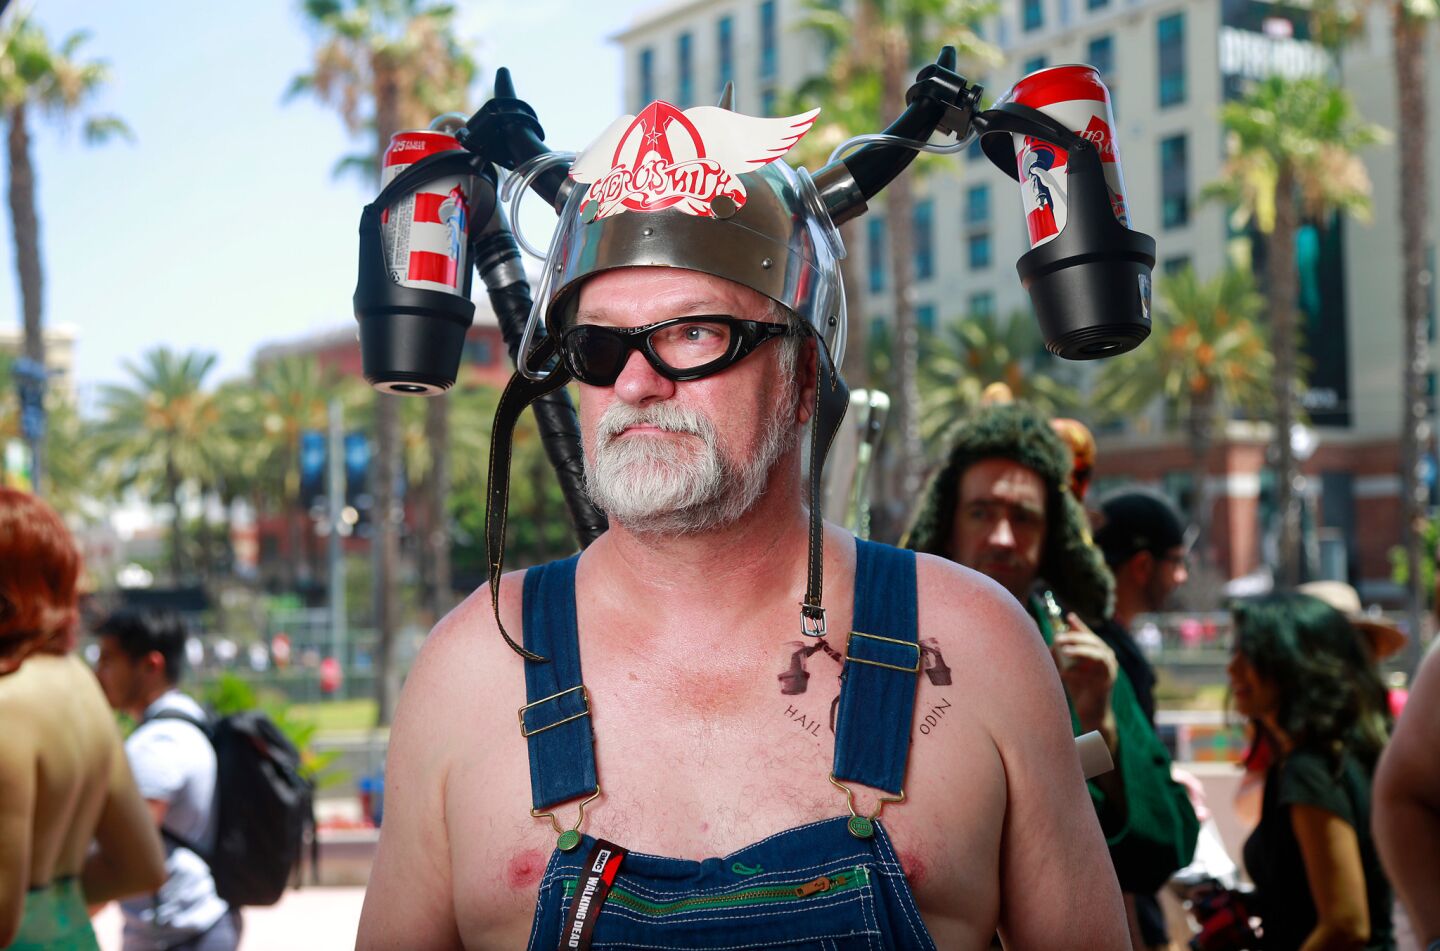 Bill Craig of San Jacinto was dressed as Odin from Asgard Trailer Park at Comic-Con in San Diego on July 20.